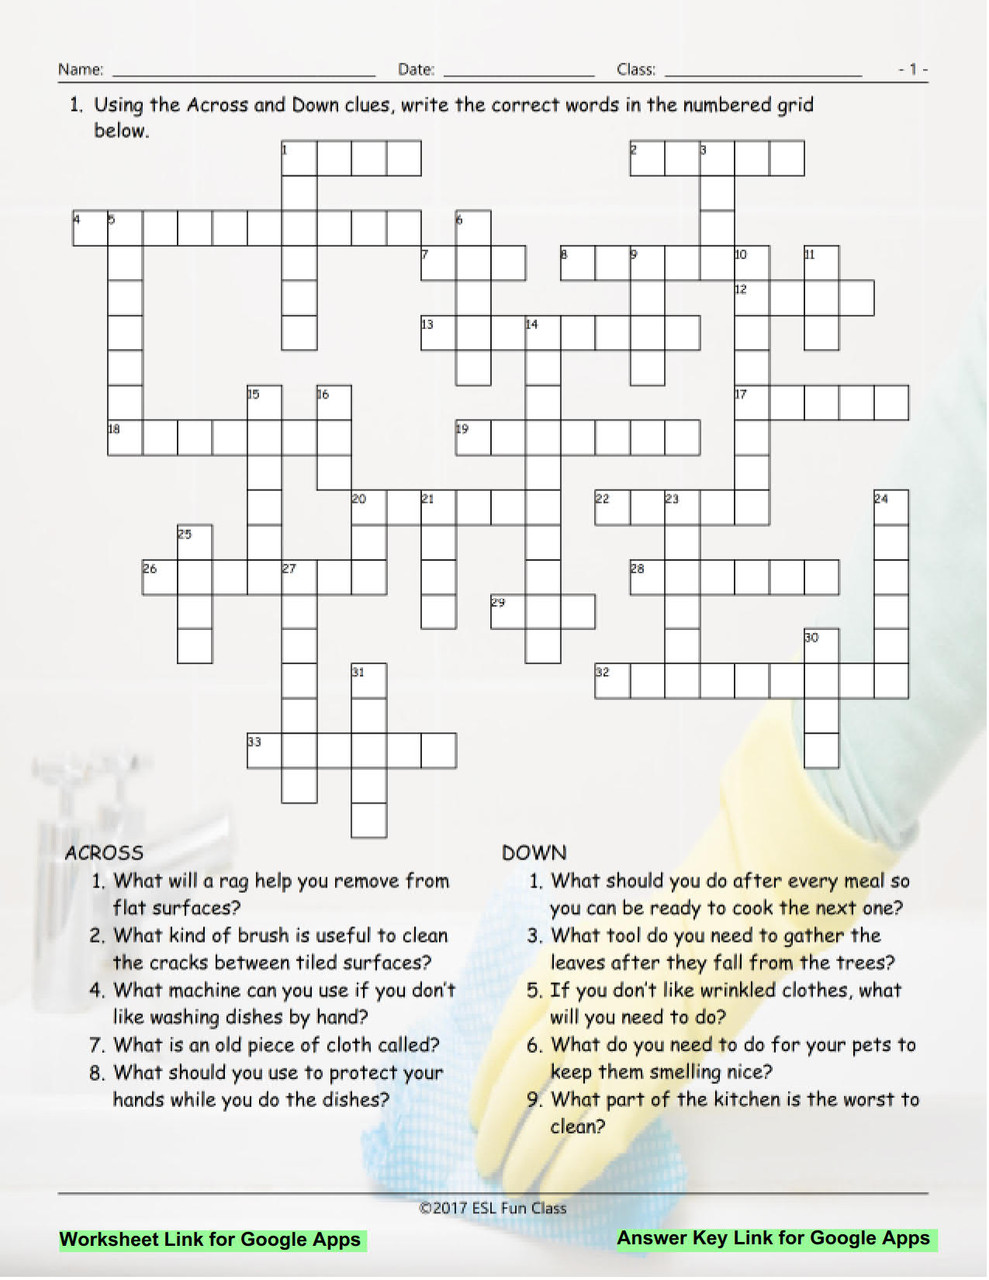 Household Chores Cleaning Supplies Interactive Crossword Puzzle for